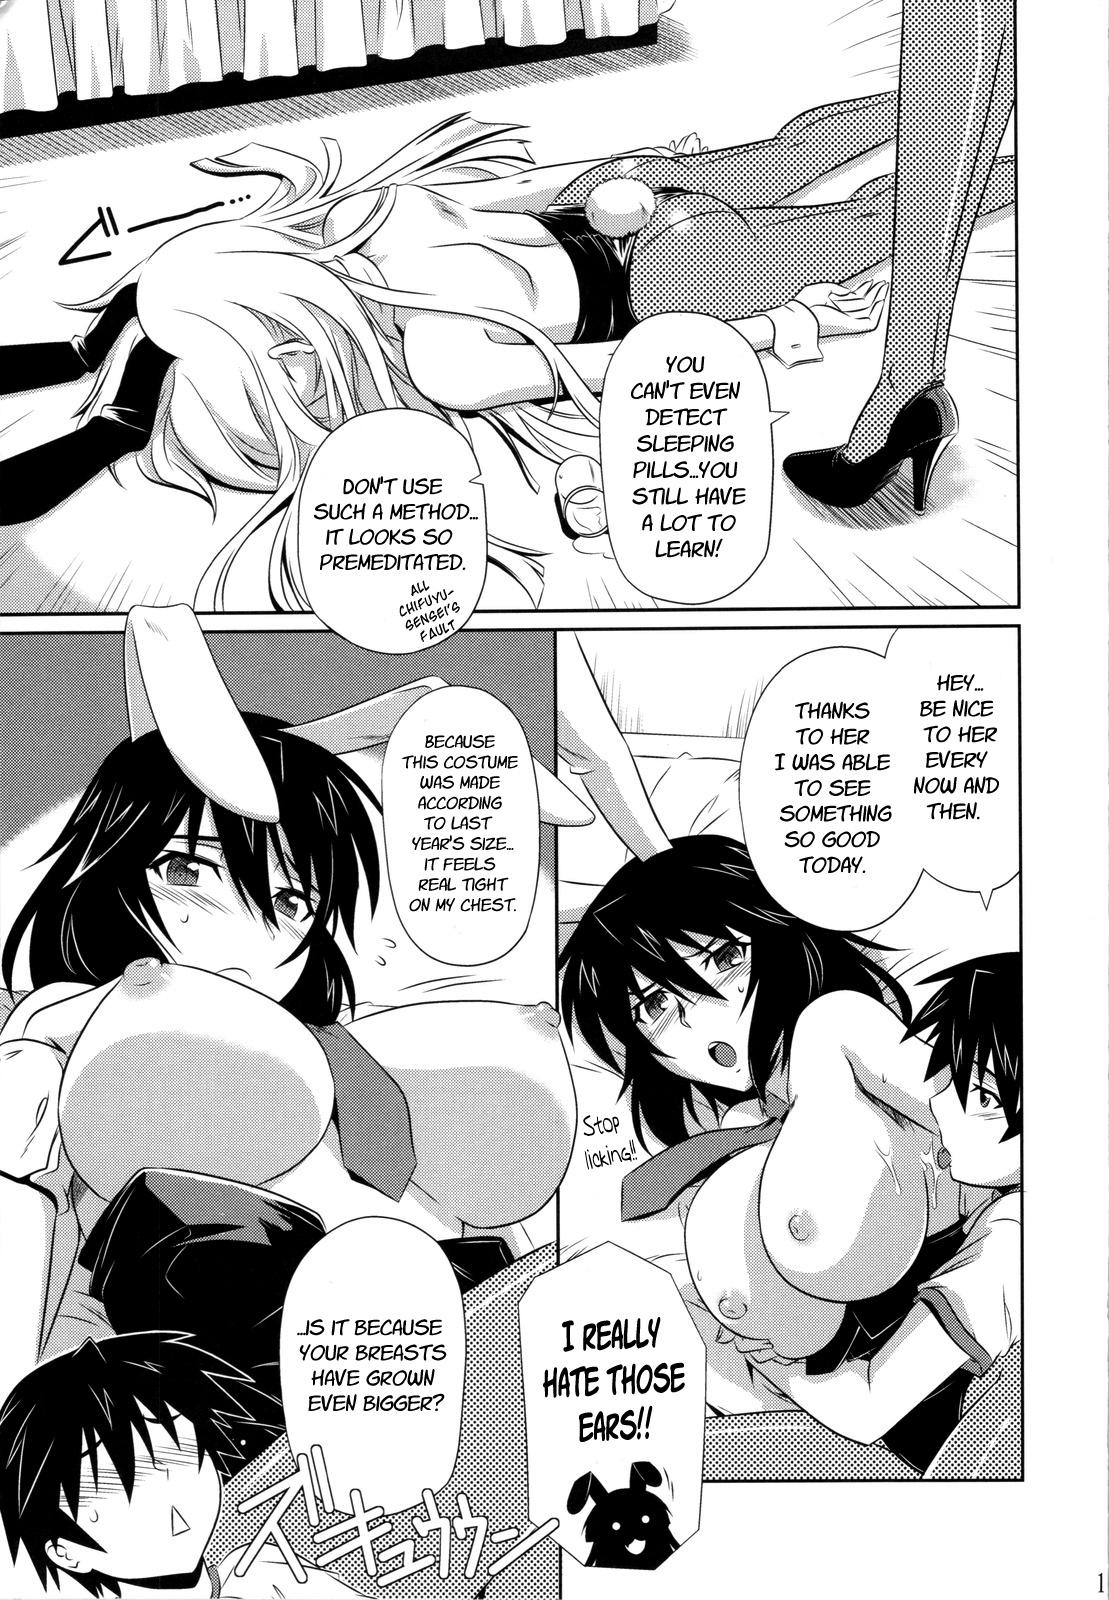 Putas is Incest Strategy 3 - Infinite stratos Hardcoresex - Page 10